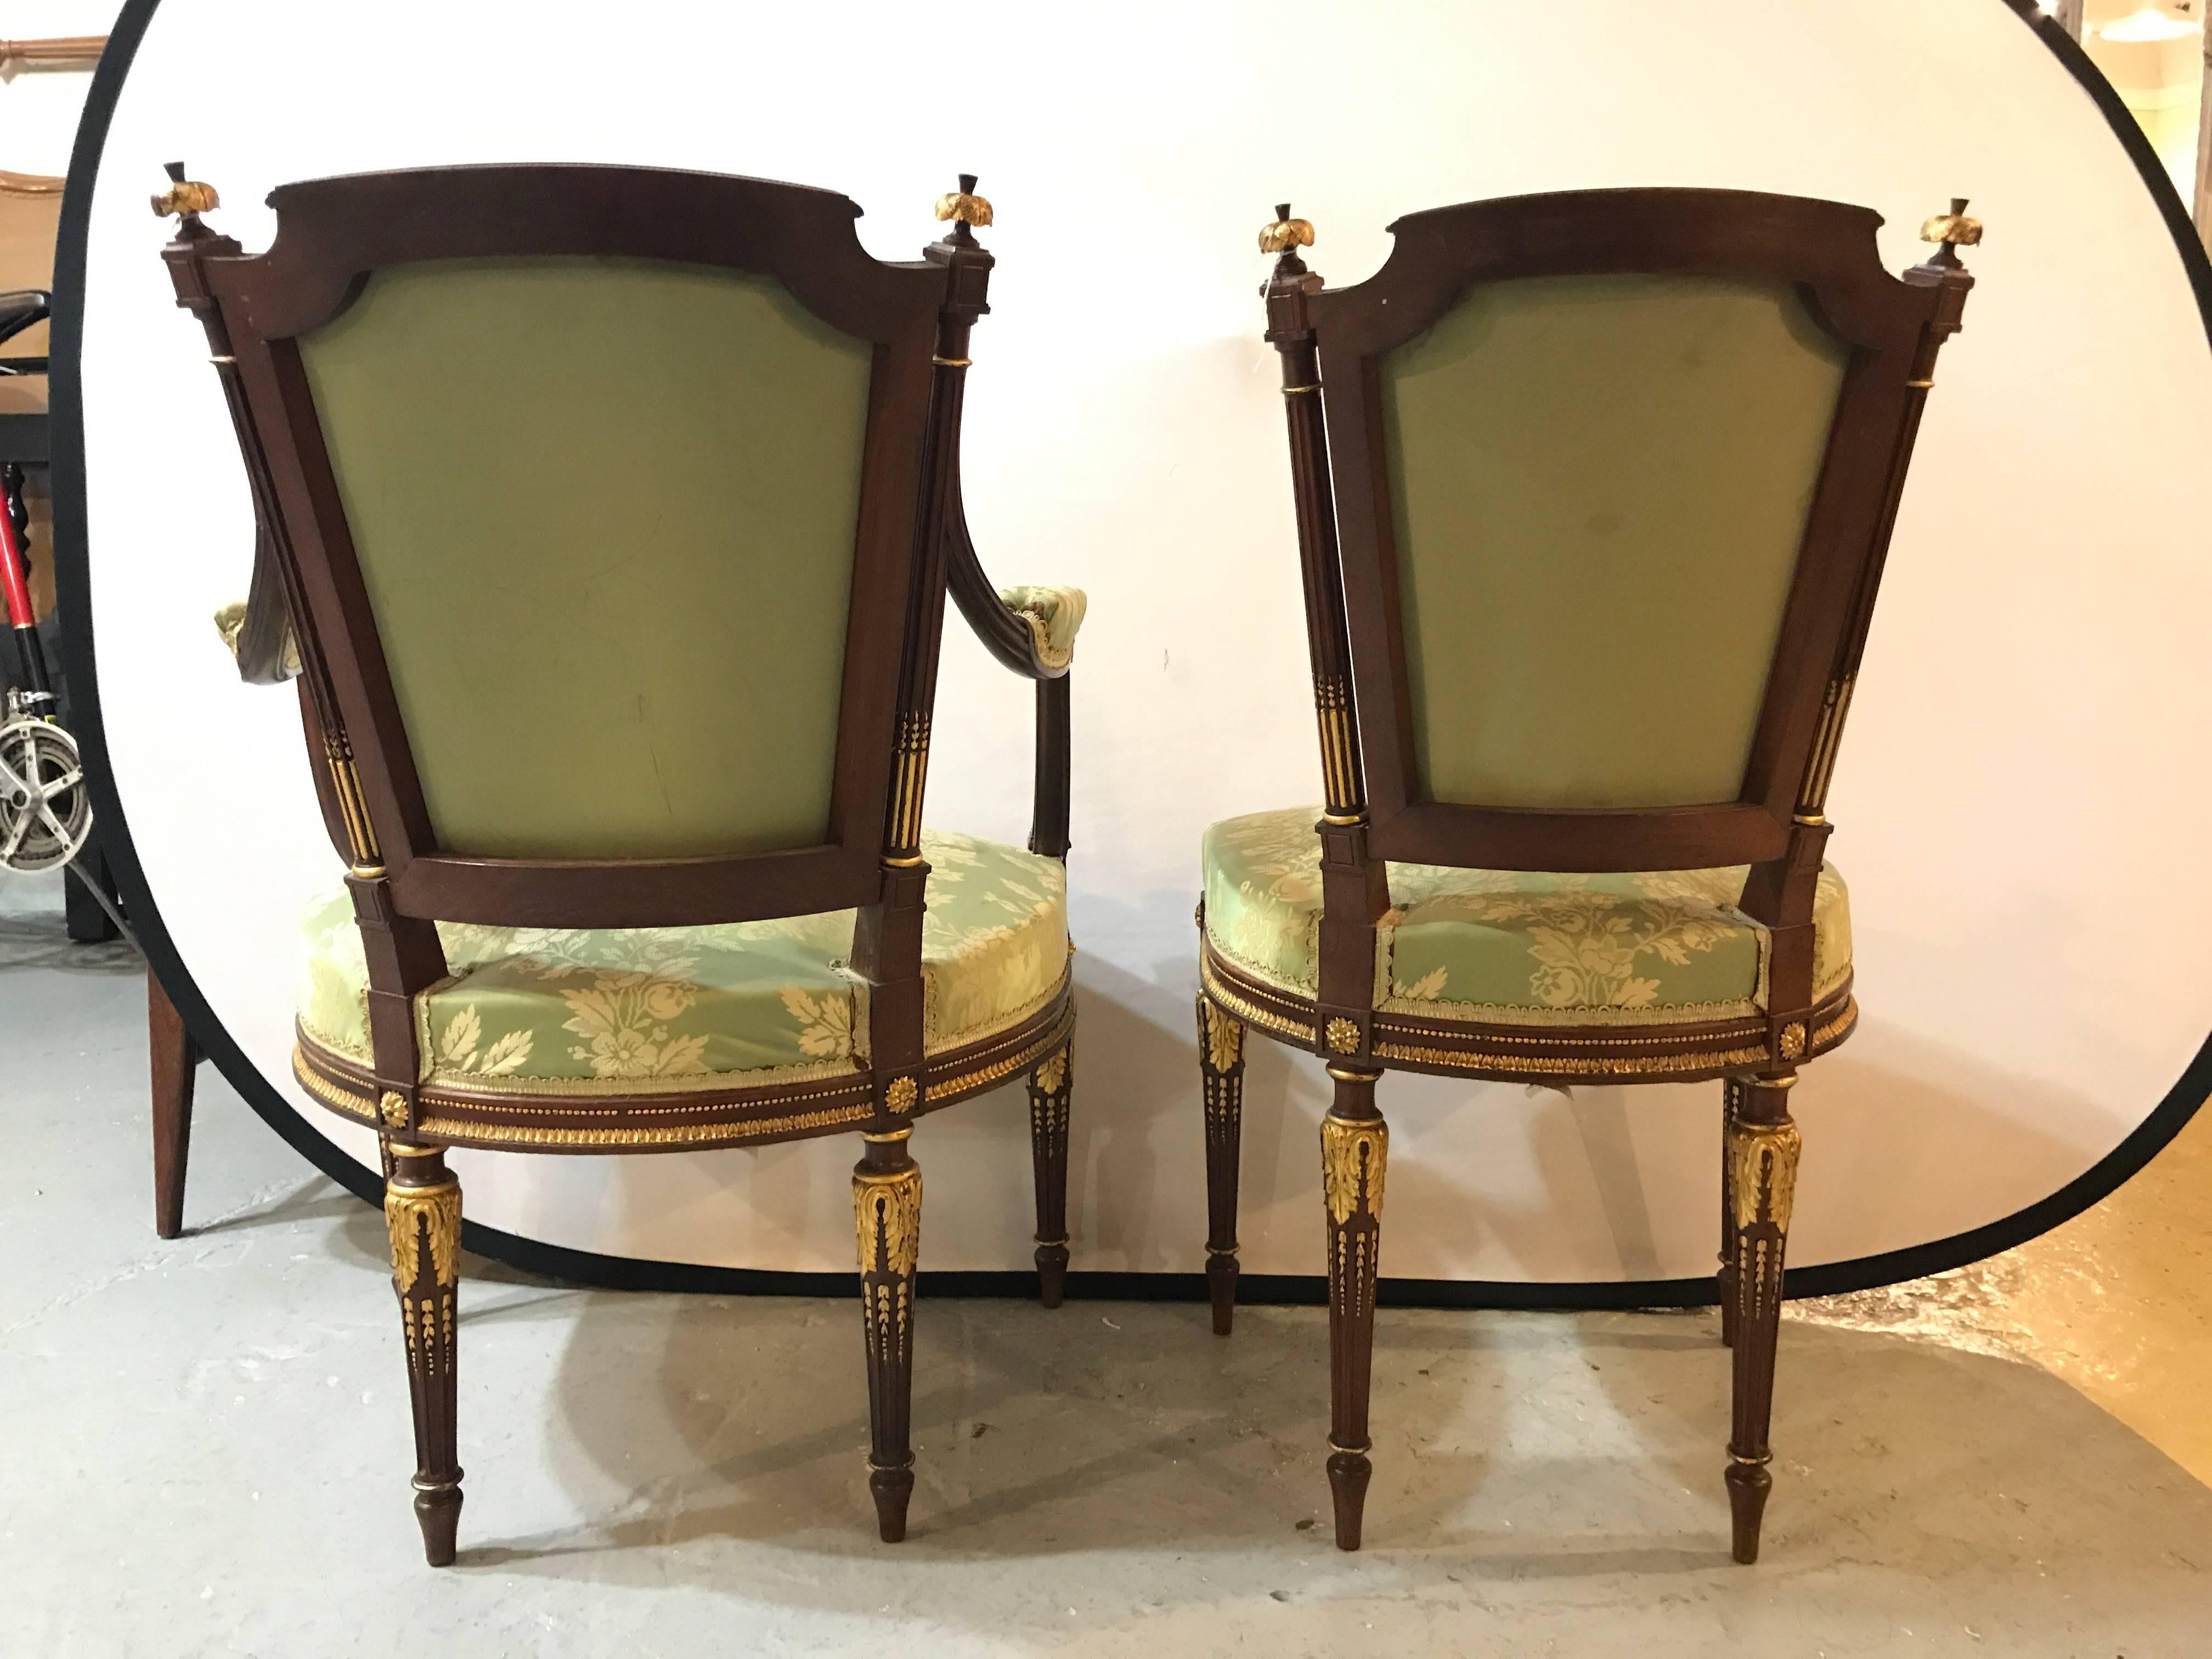 Louis XVI Style Six-Piece Parlor Suite Pair of Arm and Four Side Chairs 1